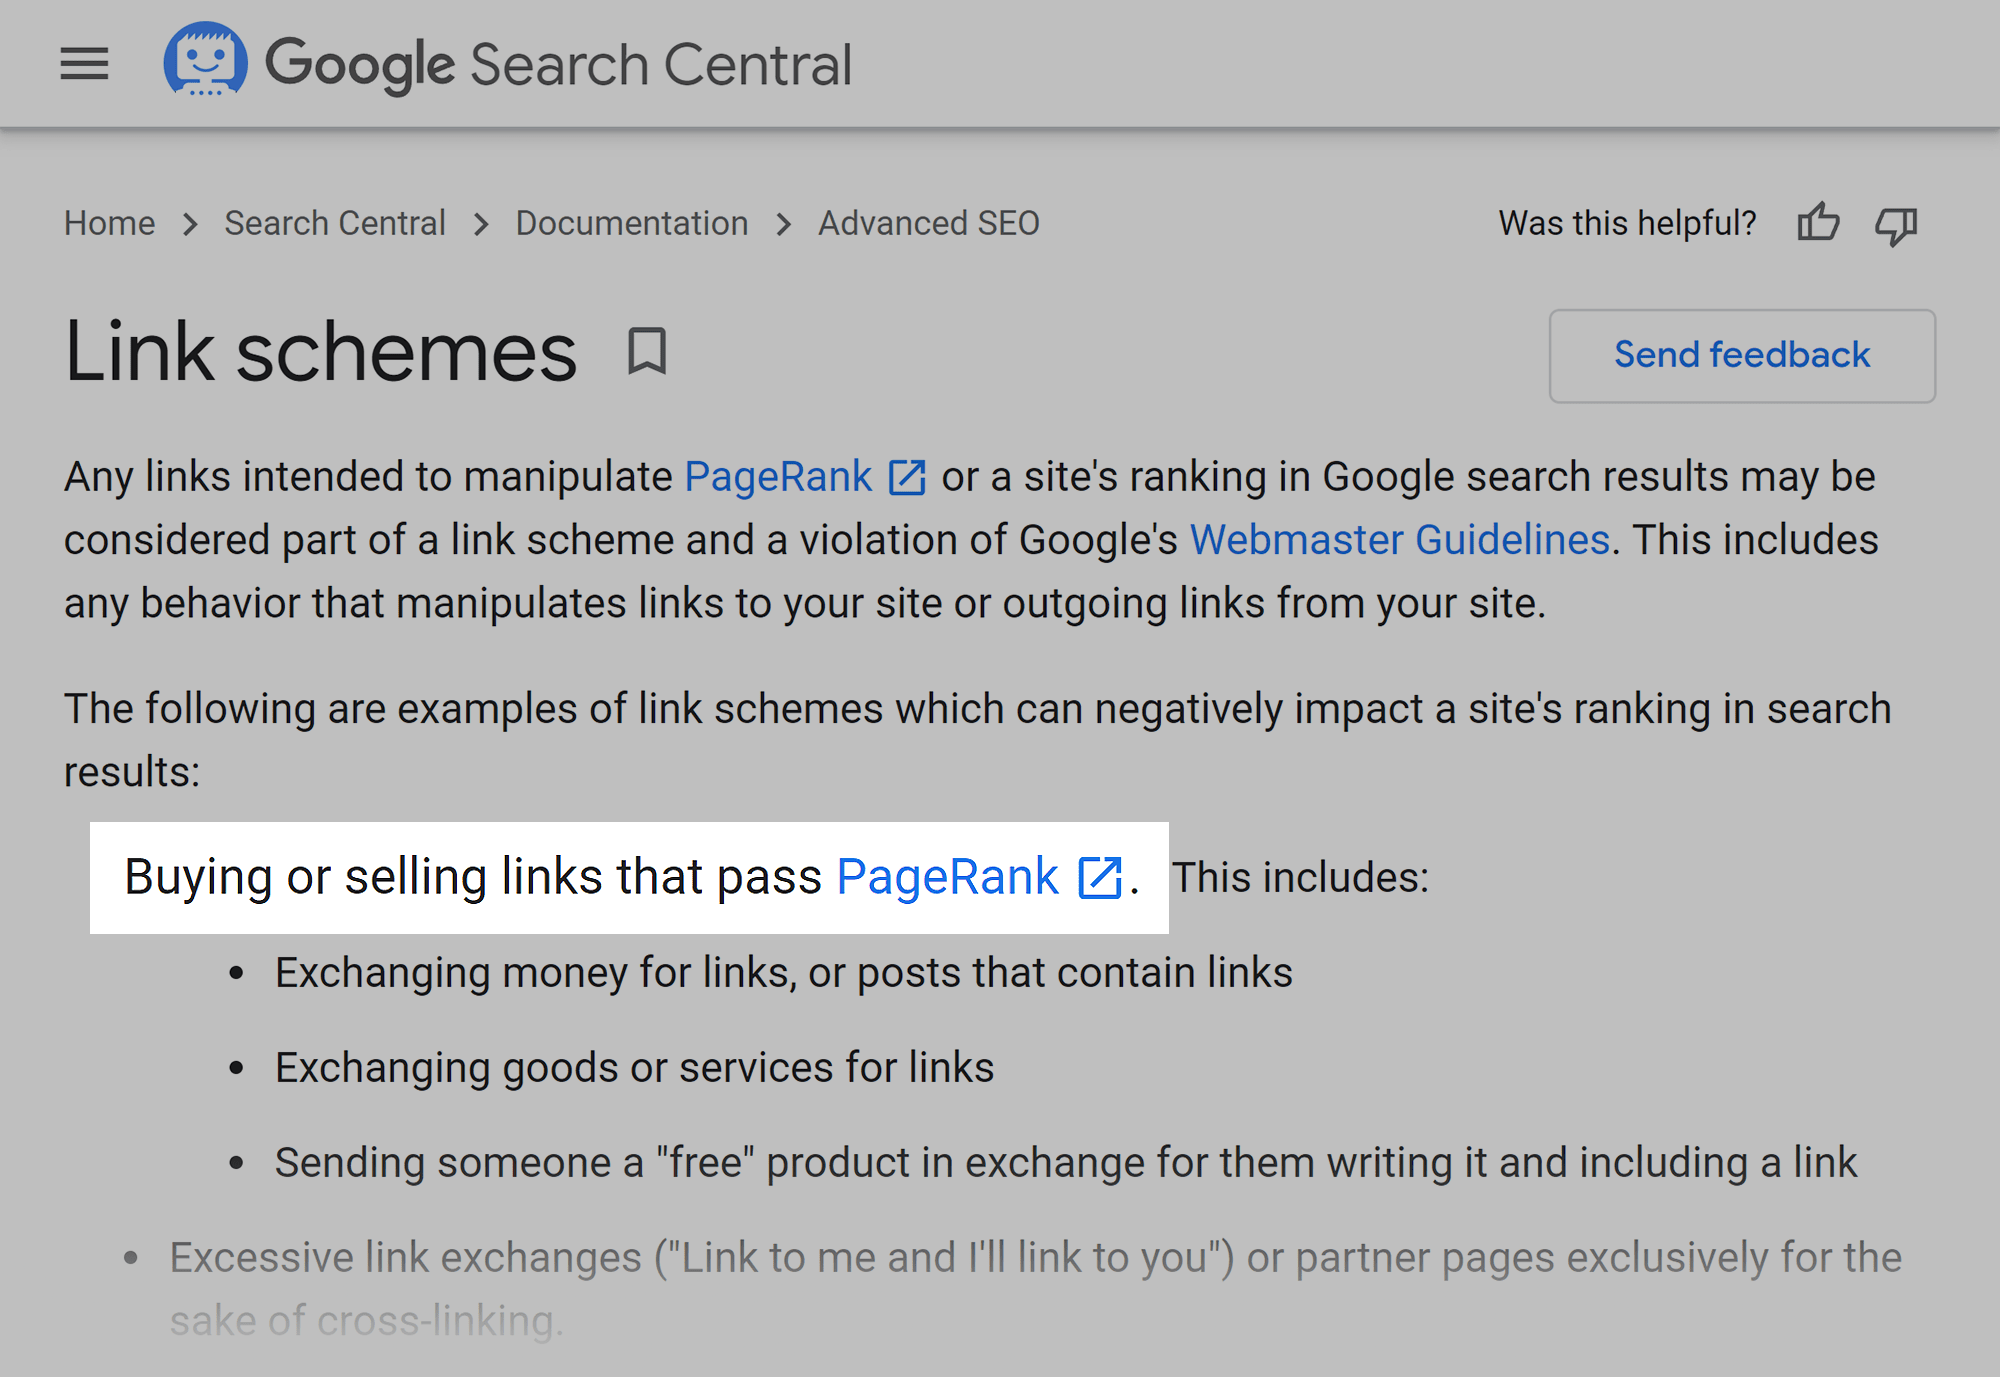 Google Search Central – Link schemes